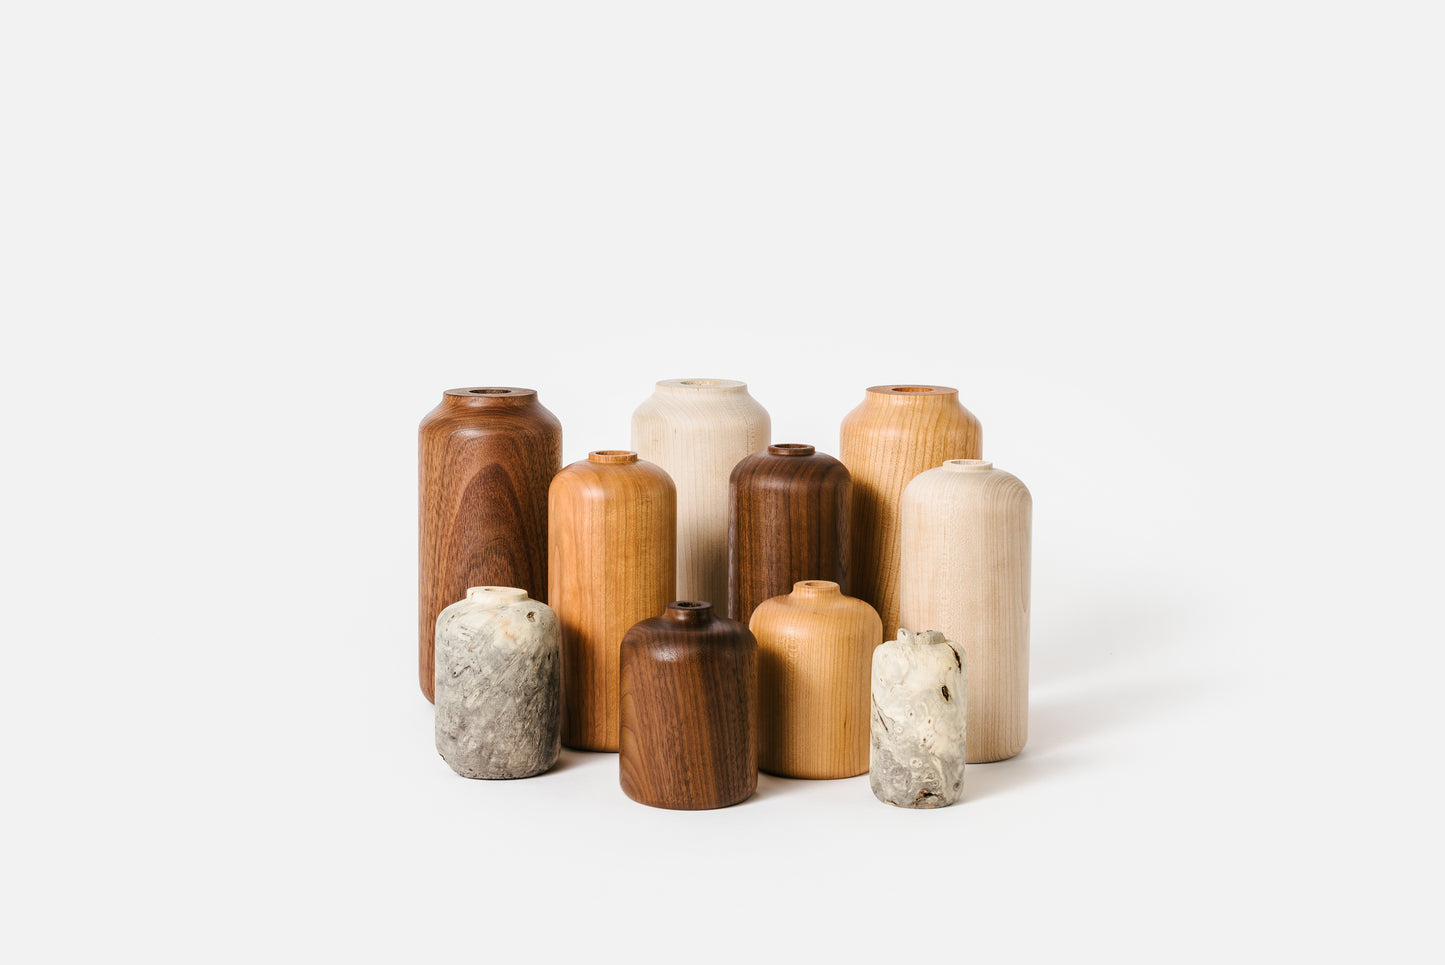 Collection of wooden vases in varying styles and materials.